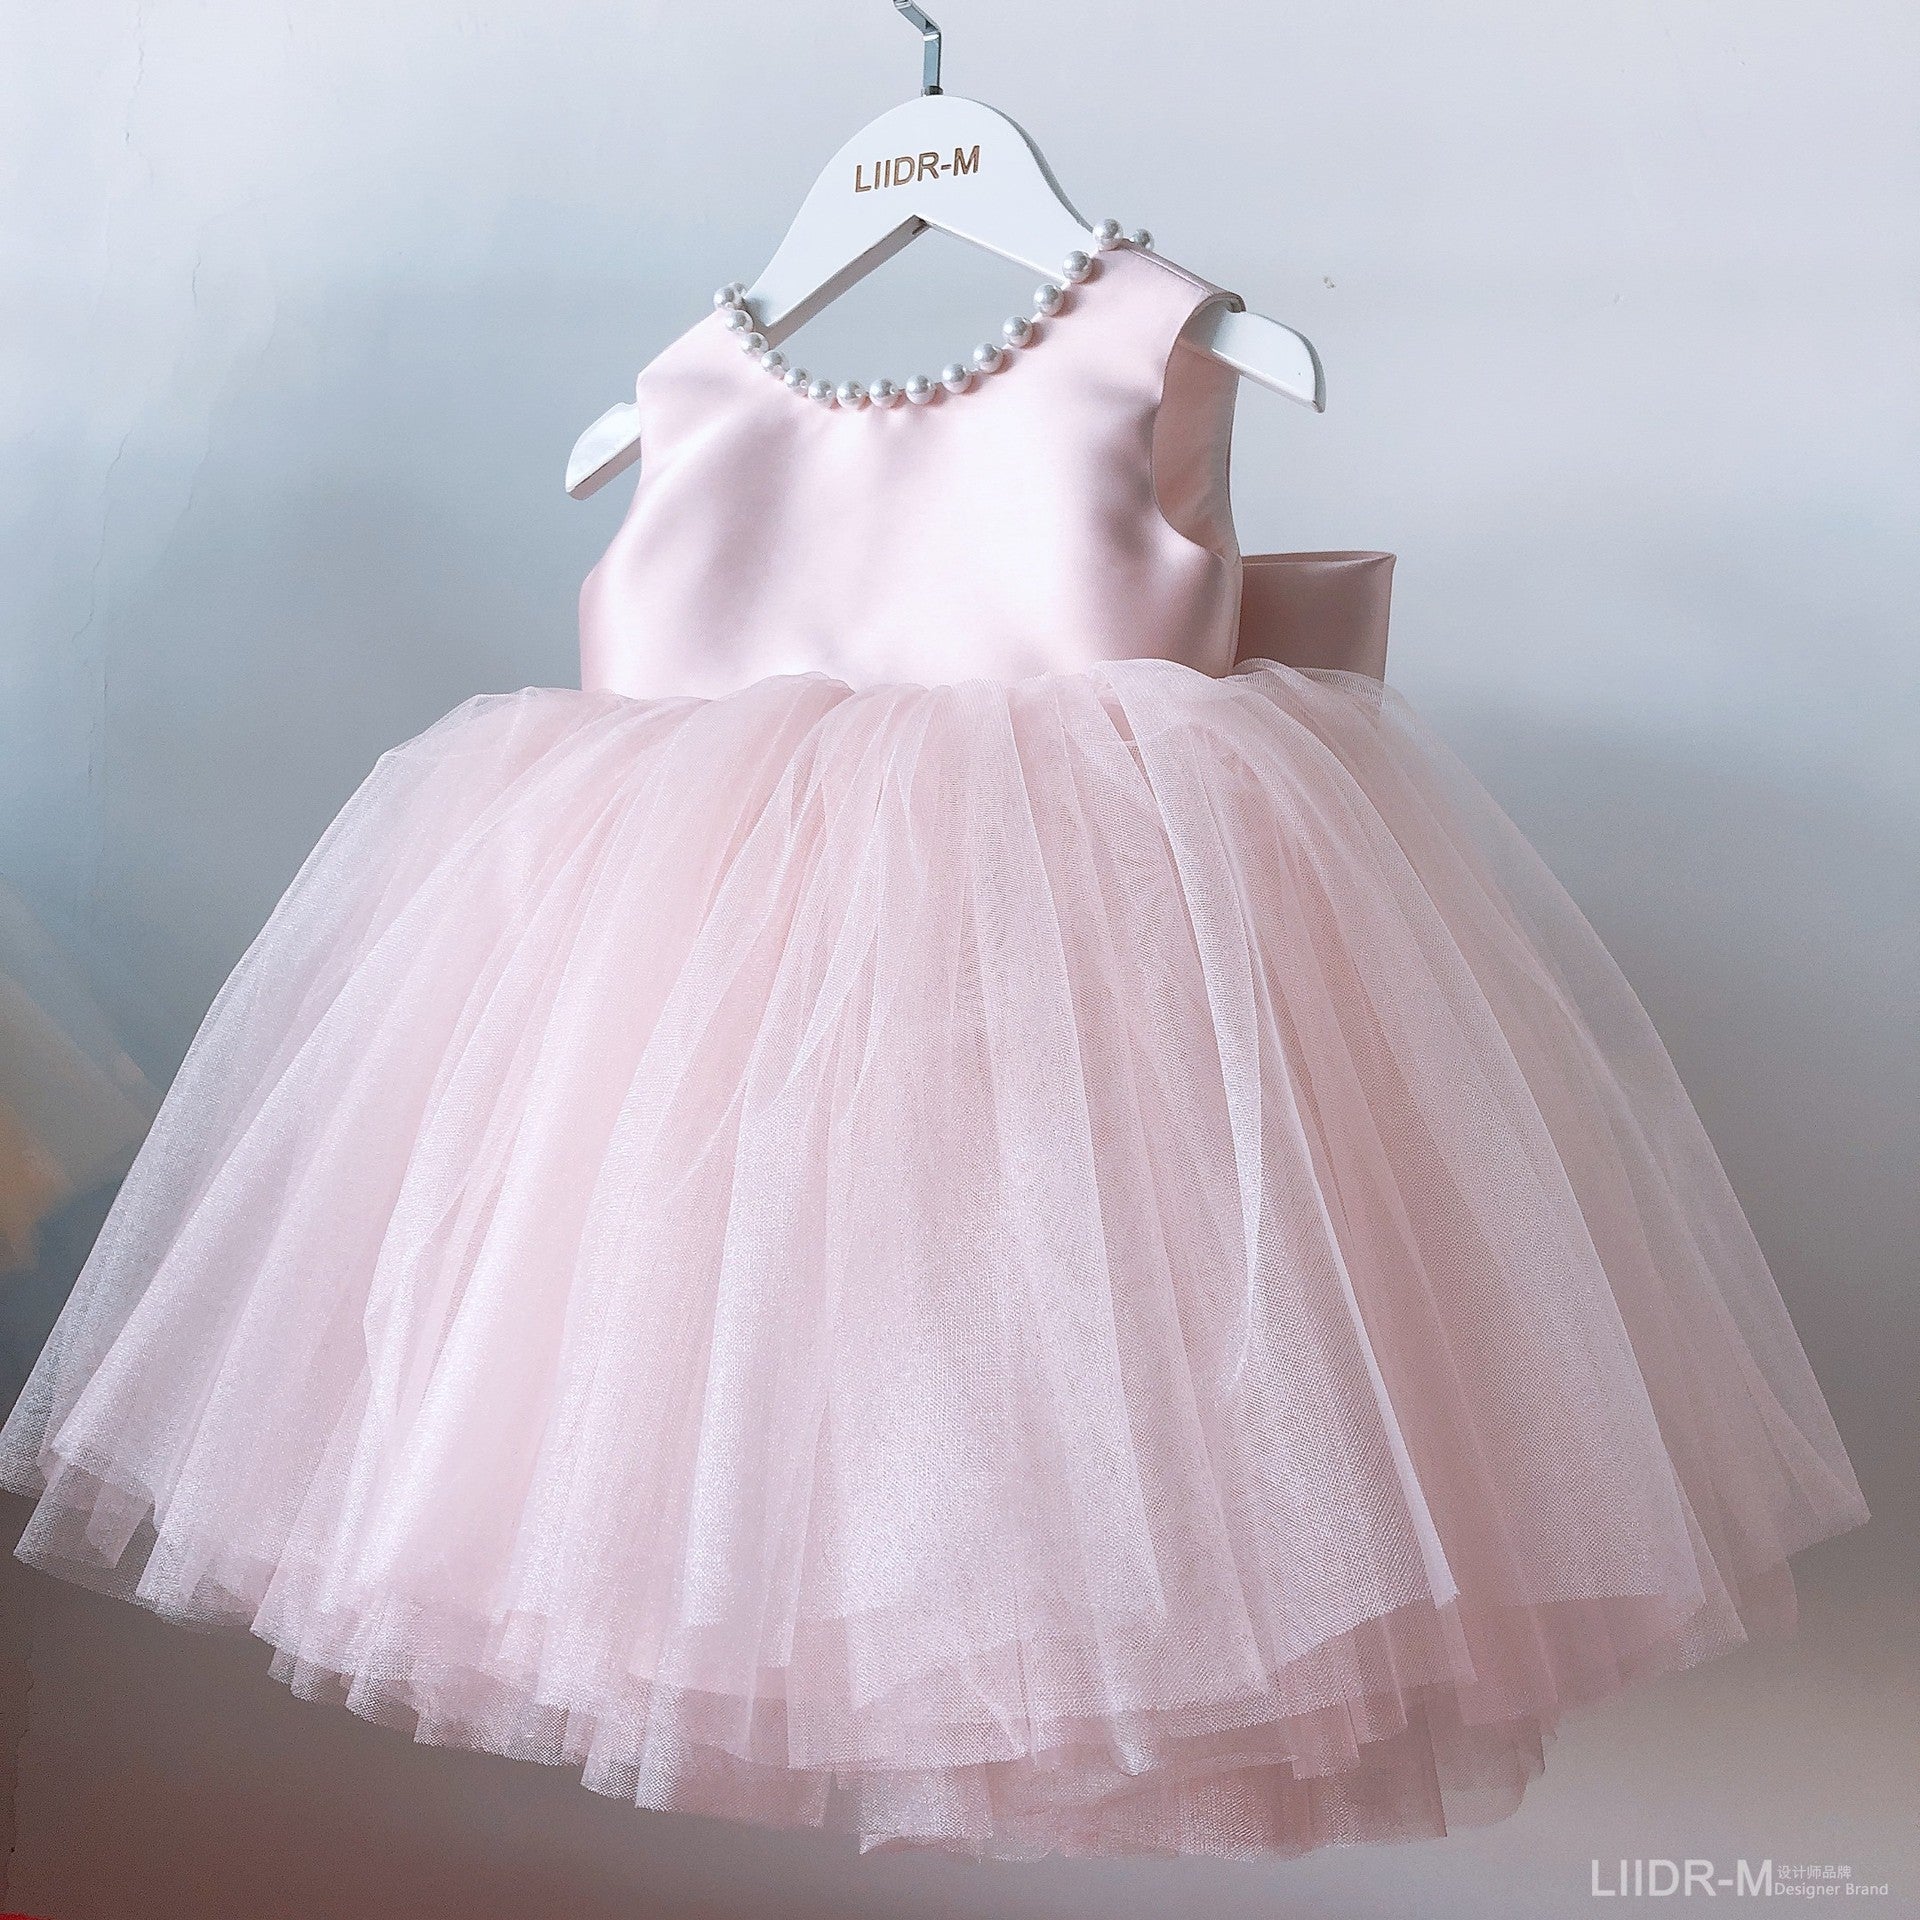 Cute Sleeveless Tulle Gown with Bow for Girls A Line Princess Dress with Imitation pearls